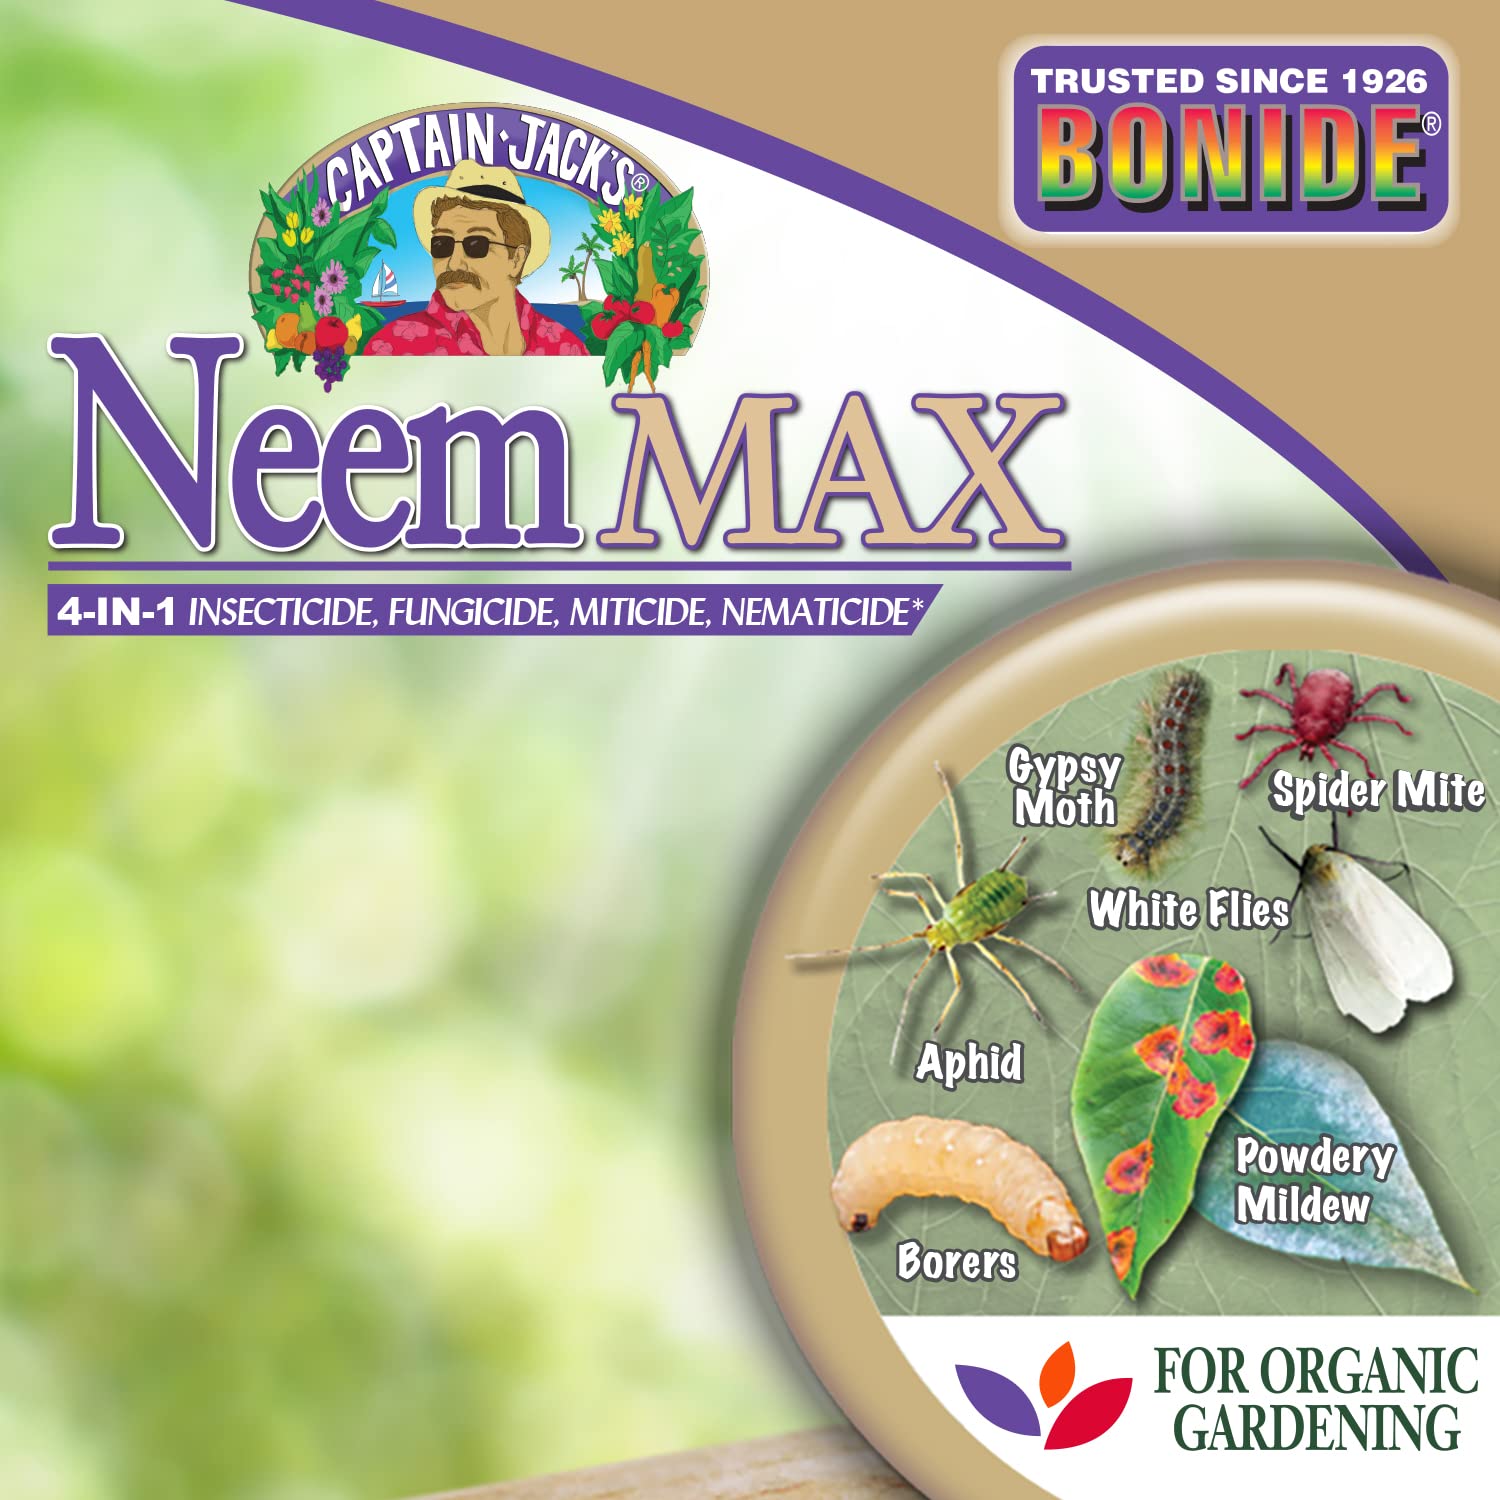 Bonide Captain Jack's Neem Max, 128 oz Ready-to-Use Spray Cold Pressed Neem Oil, Multi-Purpose Insecticide, Fungicide, Miticide and Nematicide for Organic Gardening